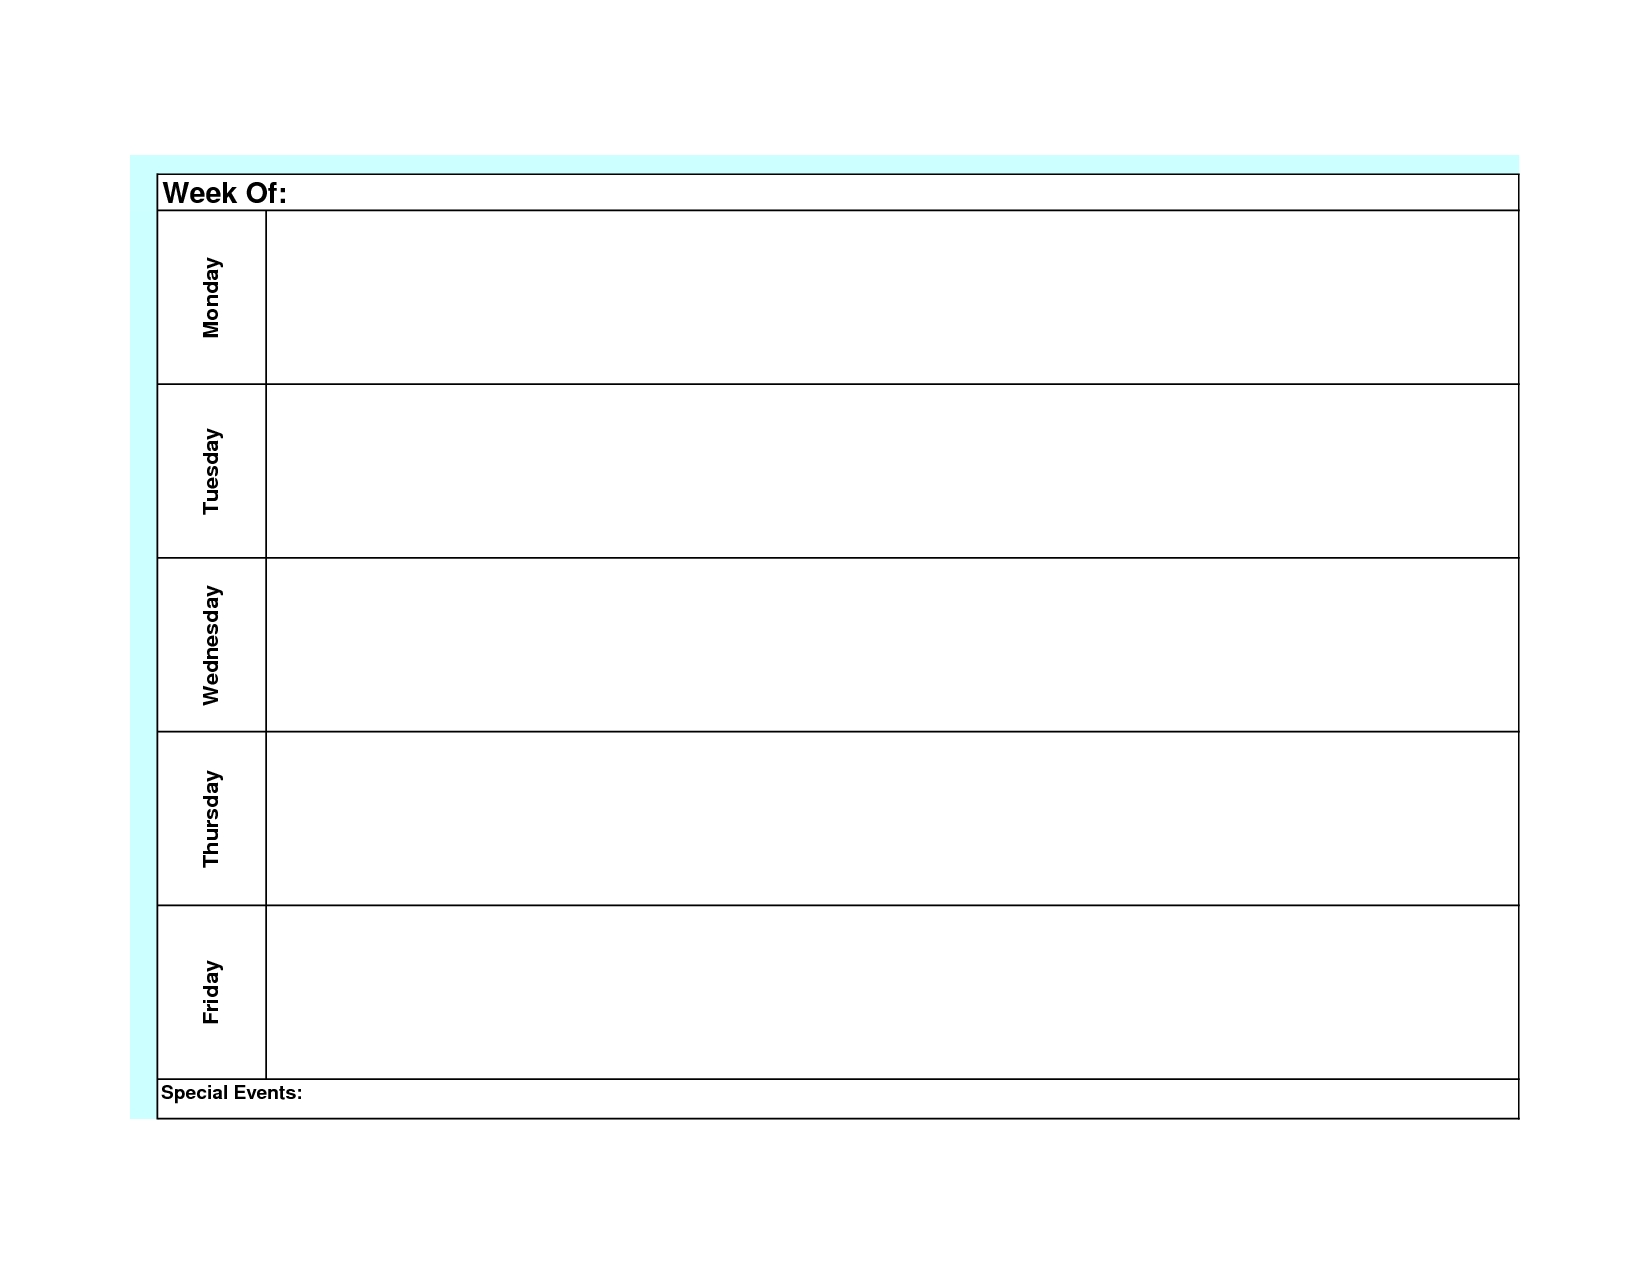 Blank Weekly Calendar Monday Through Friday Template Planner To | Smorad within Monday Through Friday Daily Planner